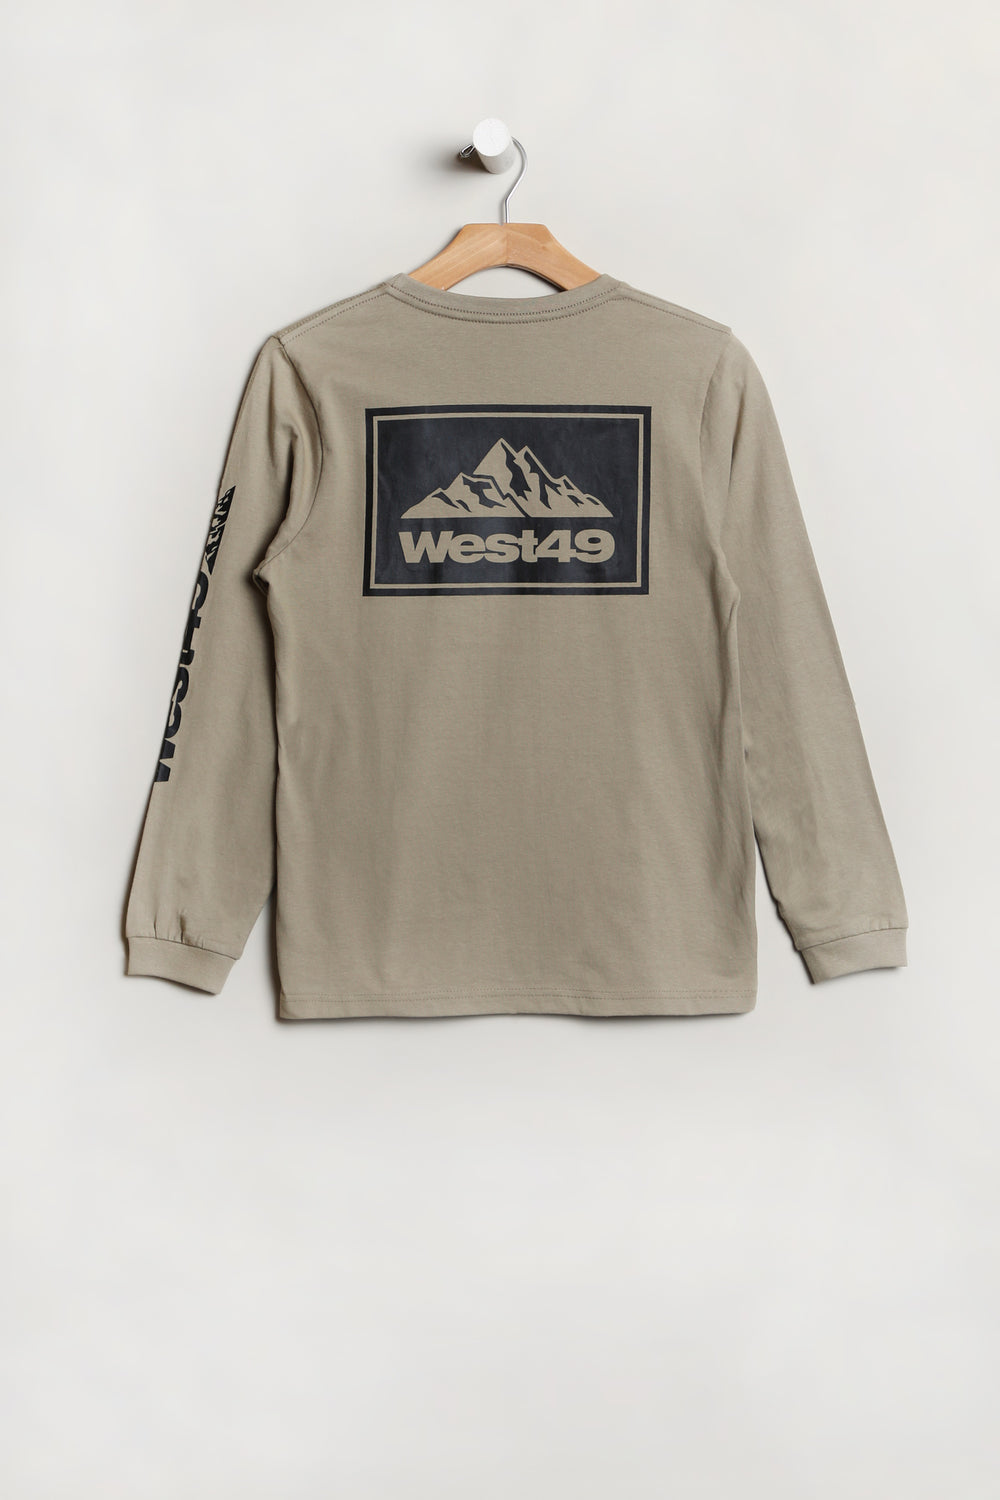 West49 Youth Mountain Long Sleeve Top West49 Youth Mountain Long Sleeve Top